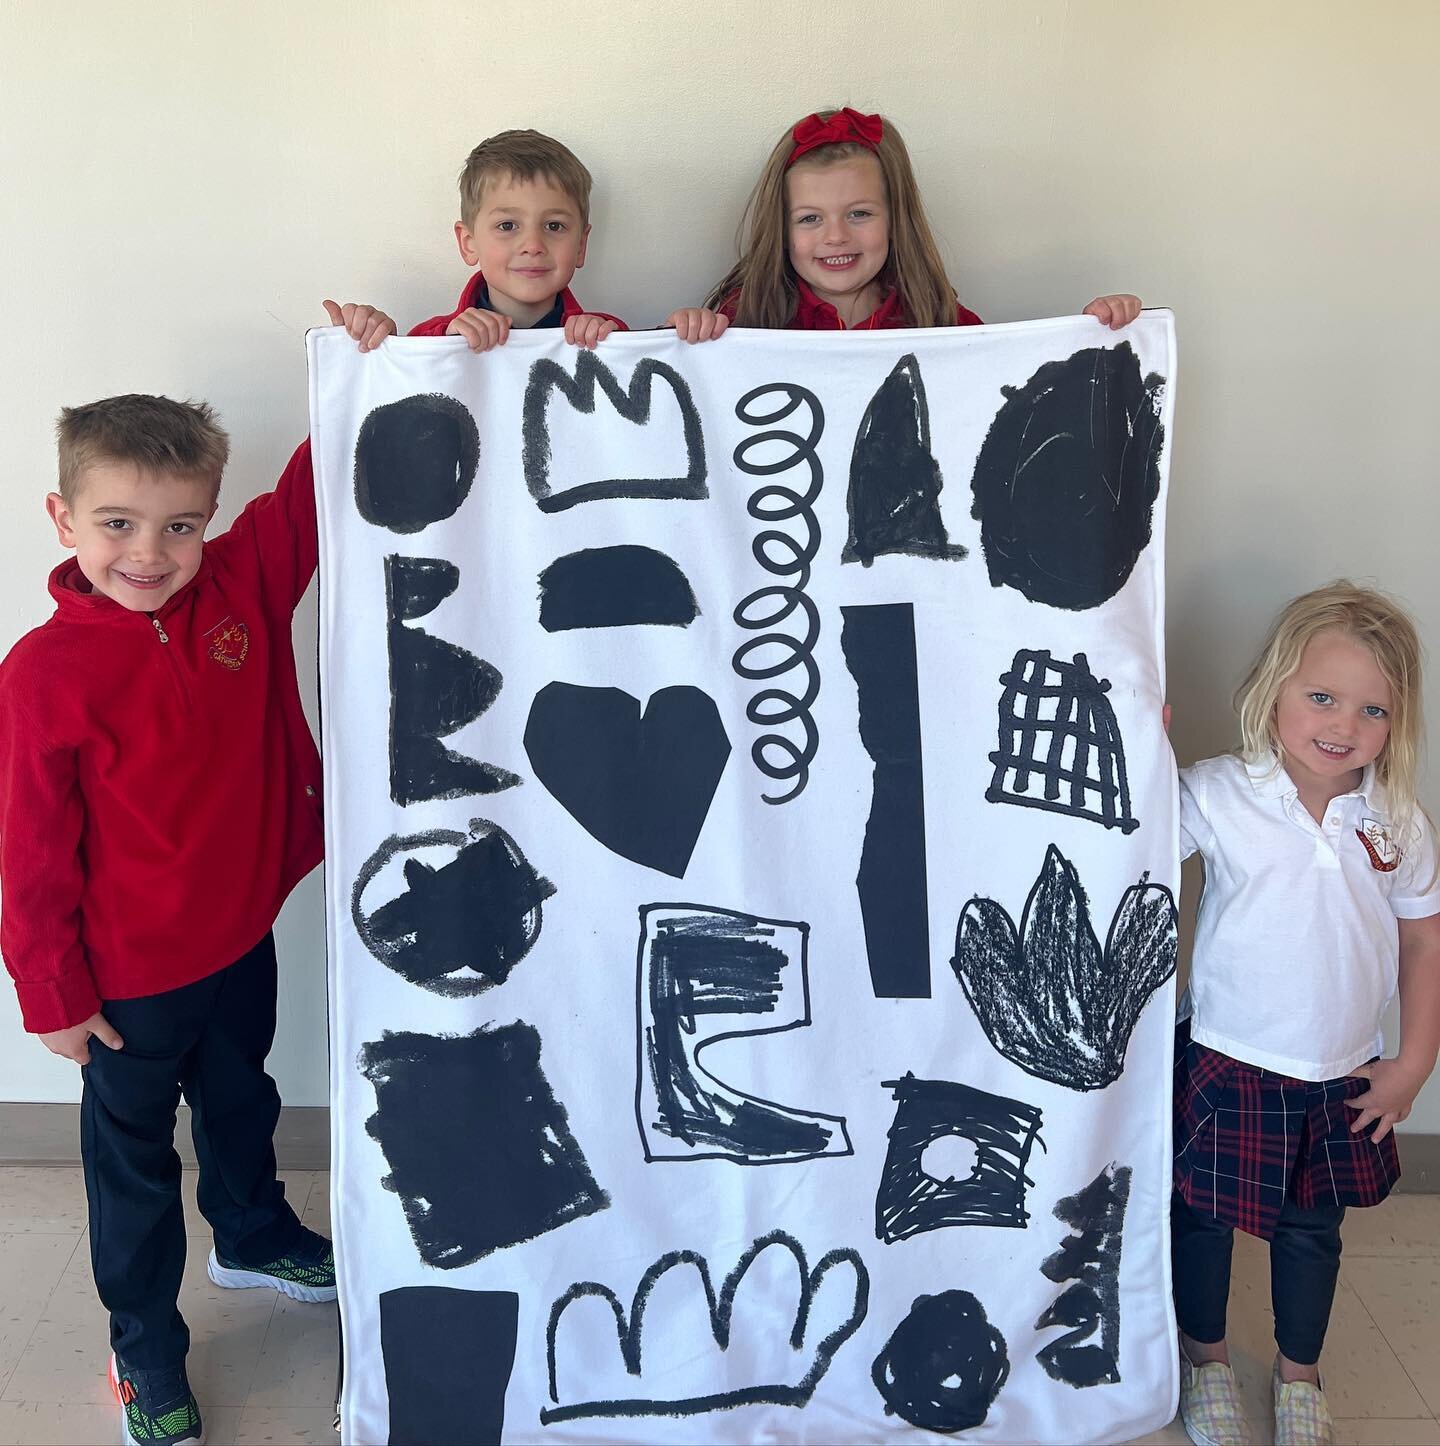 Check out the custom fleece blankets created by our art teacher, Mrs. Selis and each class. These one-of-a-kind special keepsakes will be auctioned off on Friday at our April in Paris(h) auction! Link in bio to preview the online auction. ❤️
#cathedr